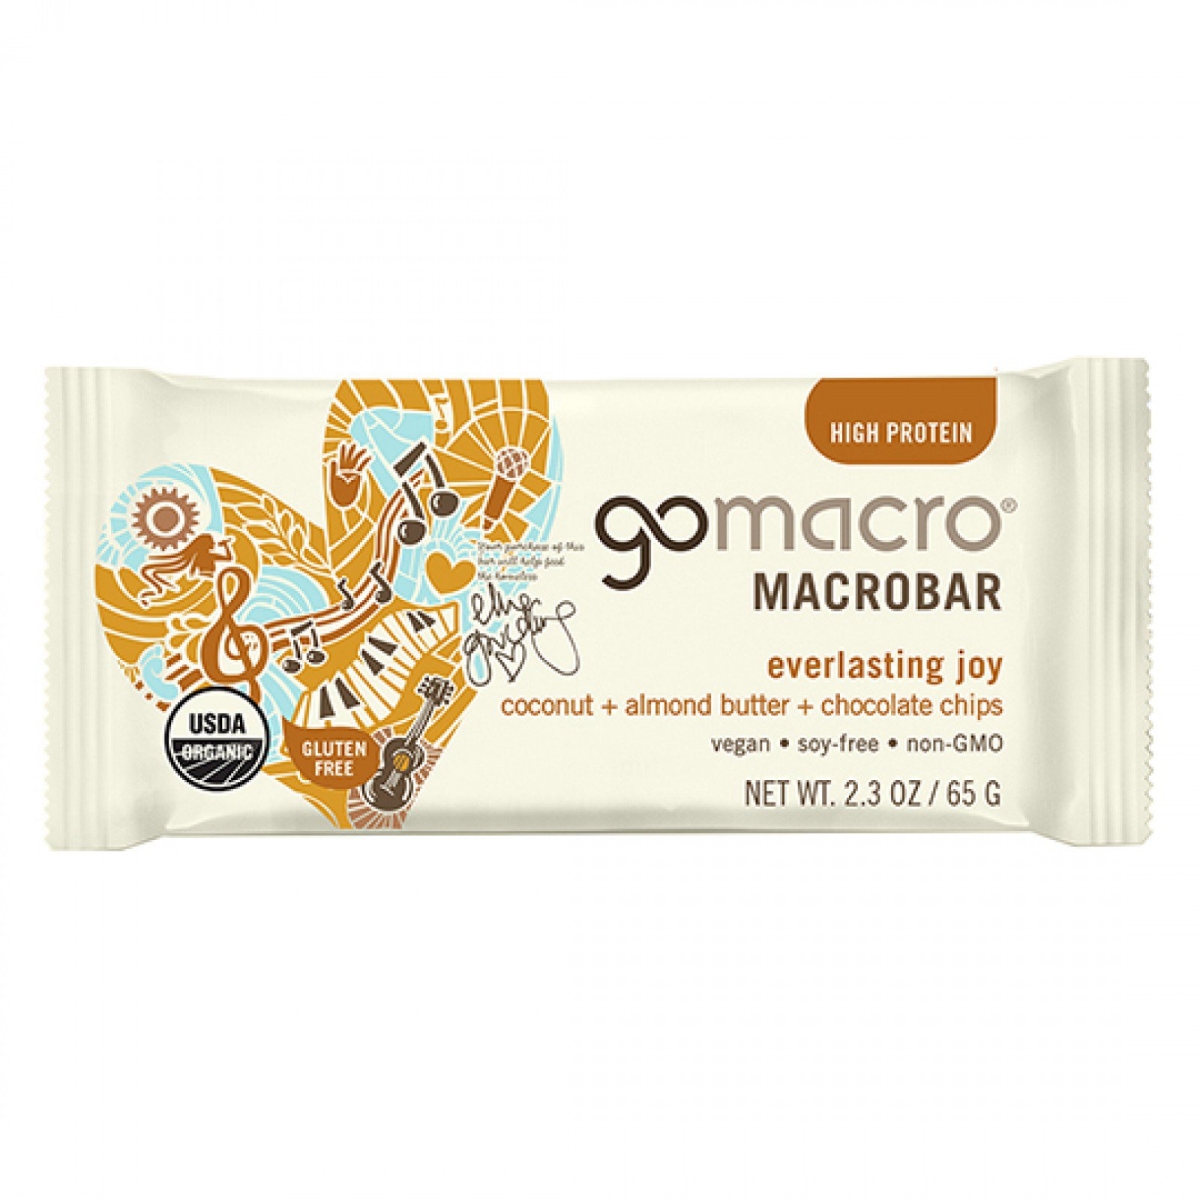 Picture of Frontier 231092 2.3 oz Gomacro Coconut Plus Almond Butter & Chocolate Chip Macrobar - 12 Pieces